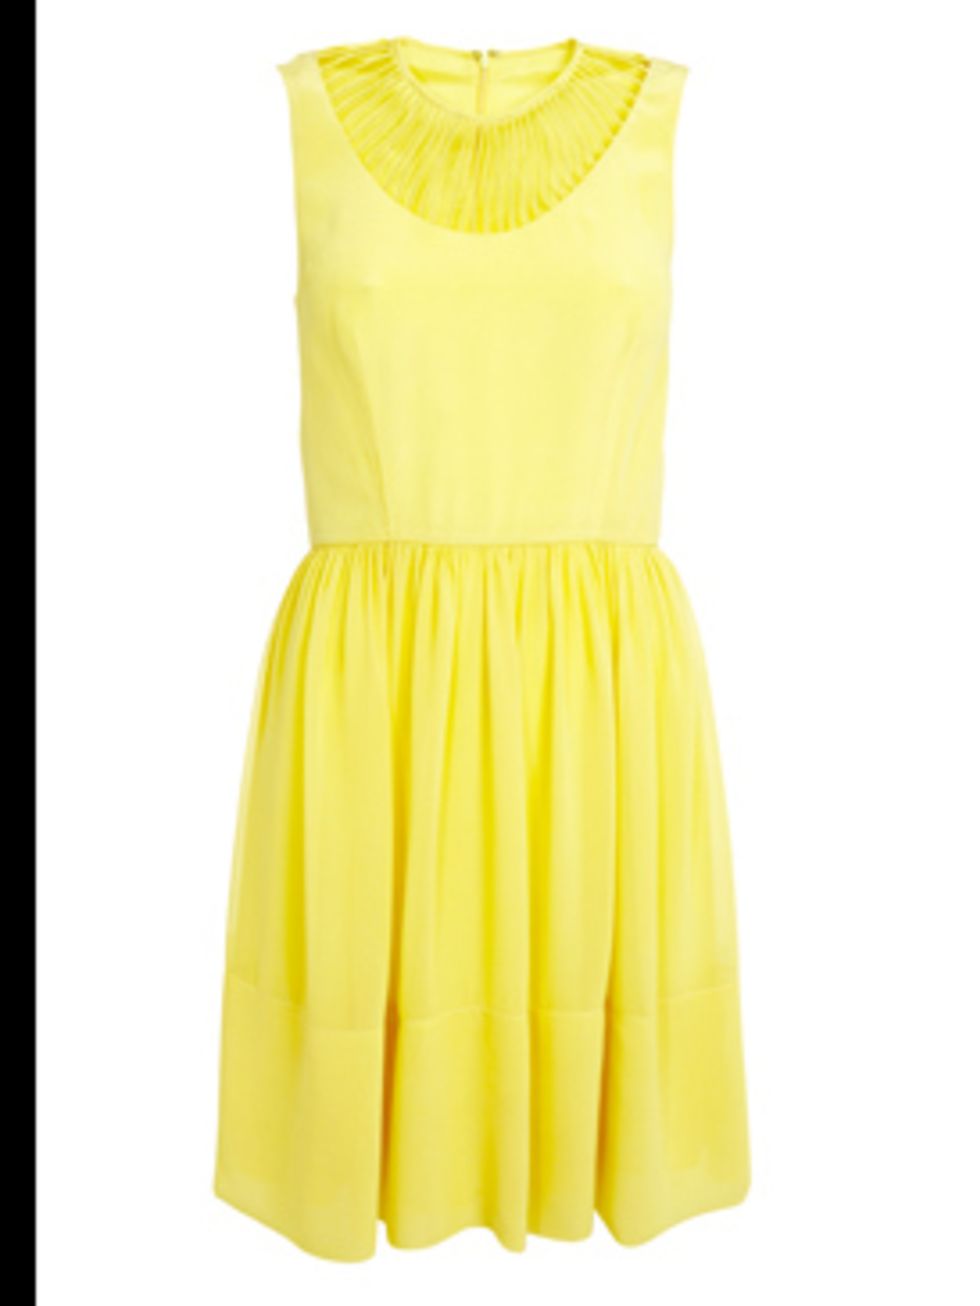 <p>Yellow dress, £149, by <a href="http://www.reiss.co.uk/shop/womens/dresses/amberly/yellow/">Reiss</a></p>